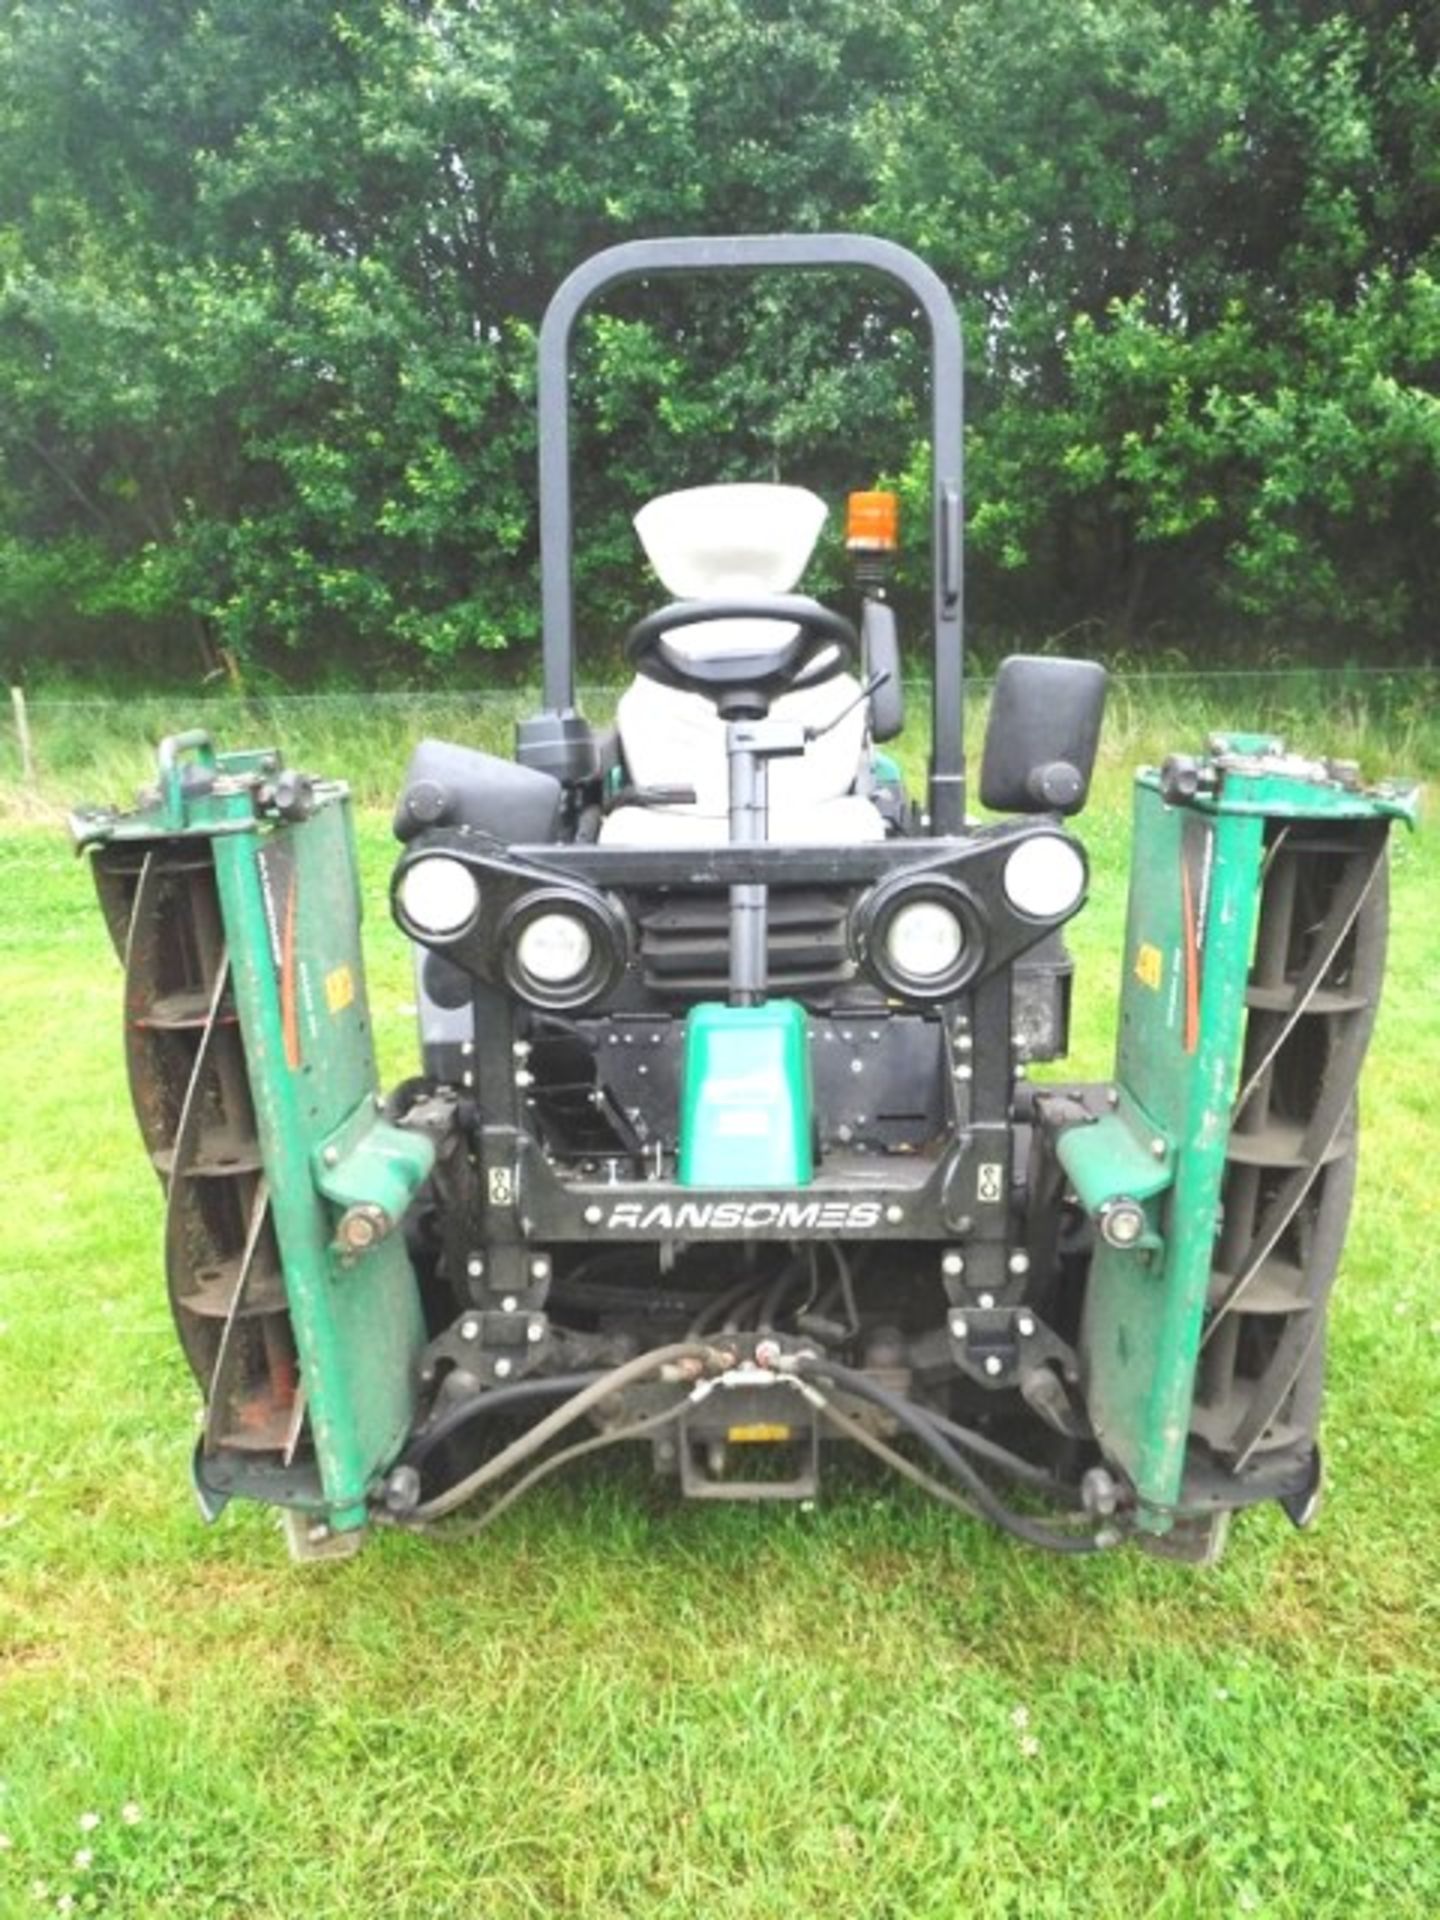 2013 REG RANSOMES PARKWAY 3 RIDE-ON MOWER REG SF13 HKG. S/N H000414. 2039HRS (NOT VERIFIED) - Image 9 of 16